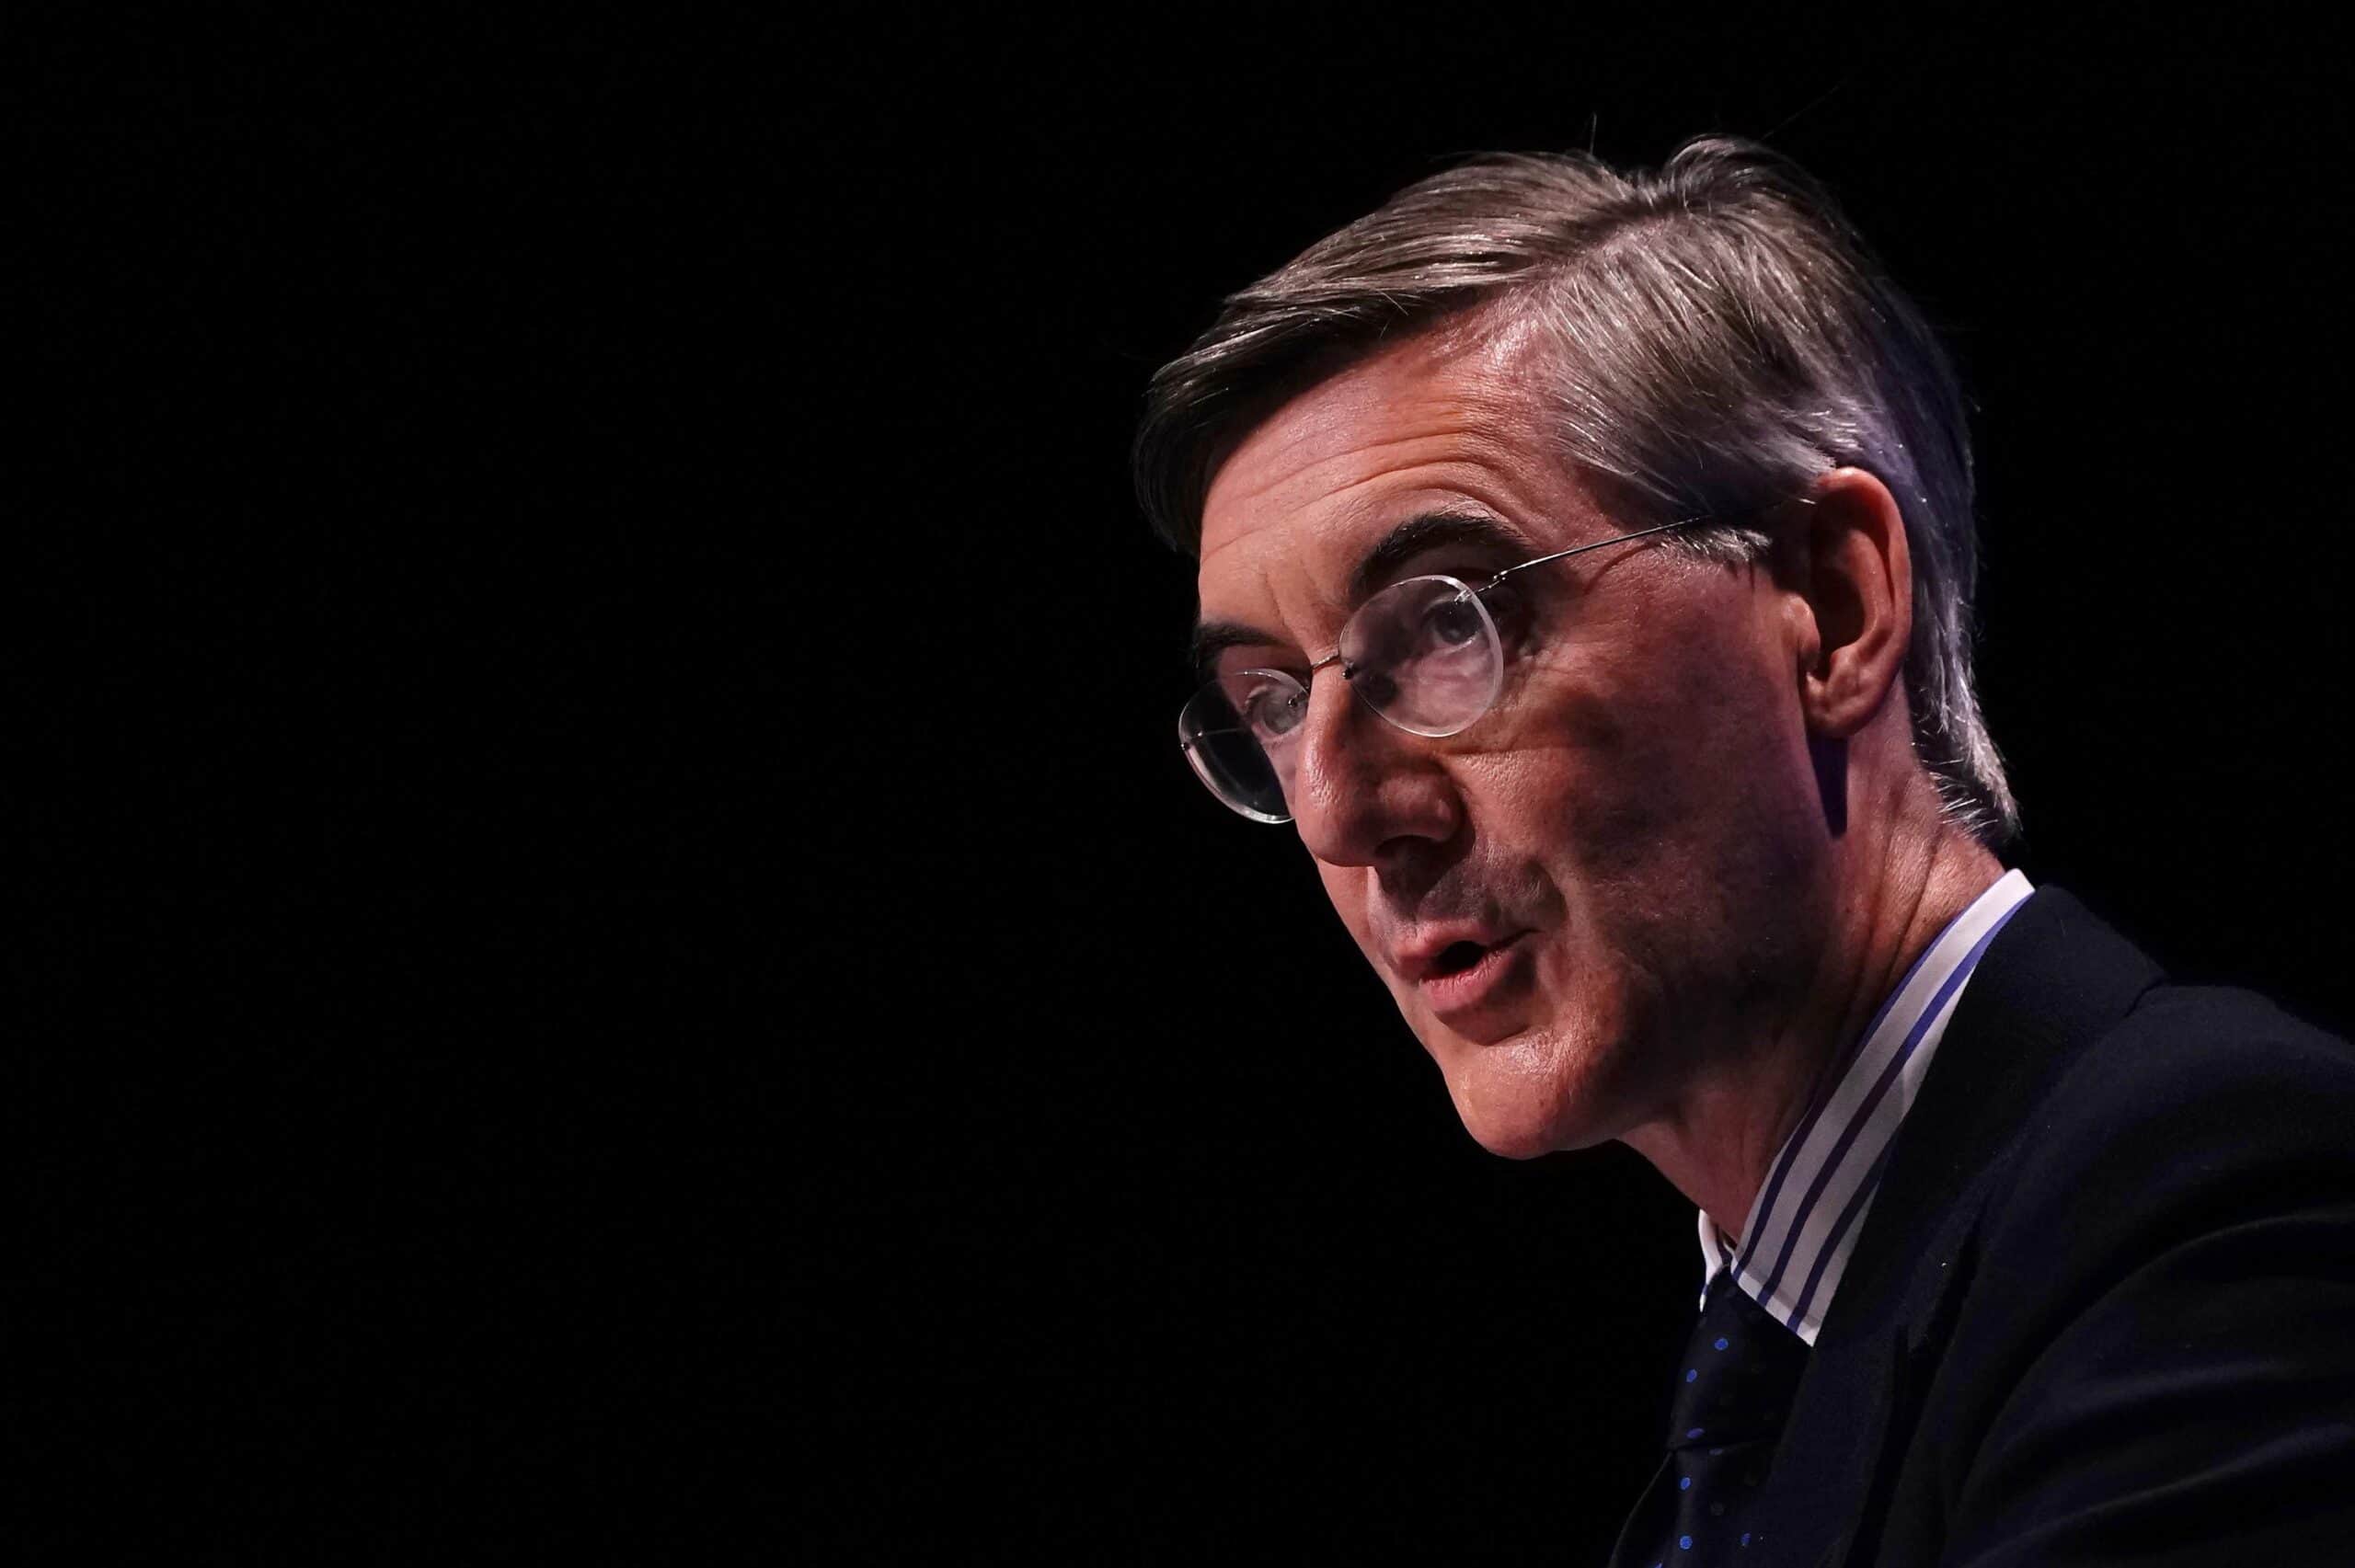 Rees-Mogg admits voter ID policy was ‘gerrymandering’